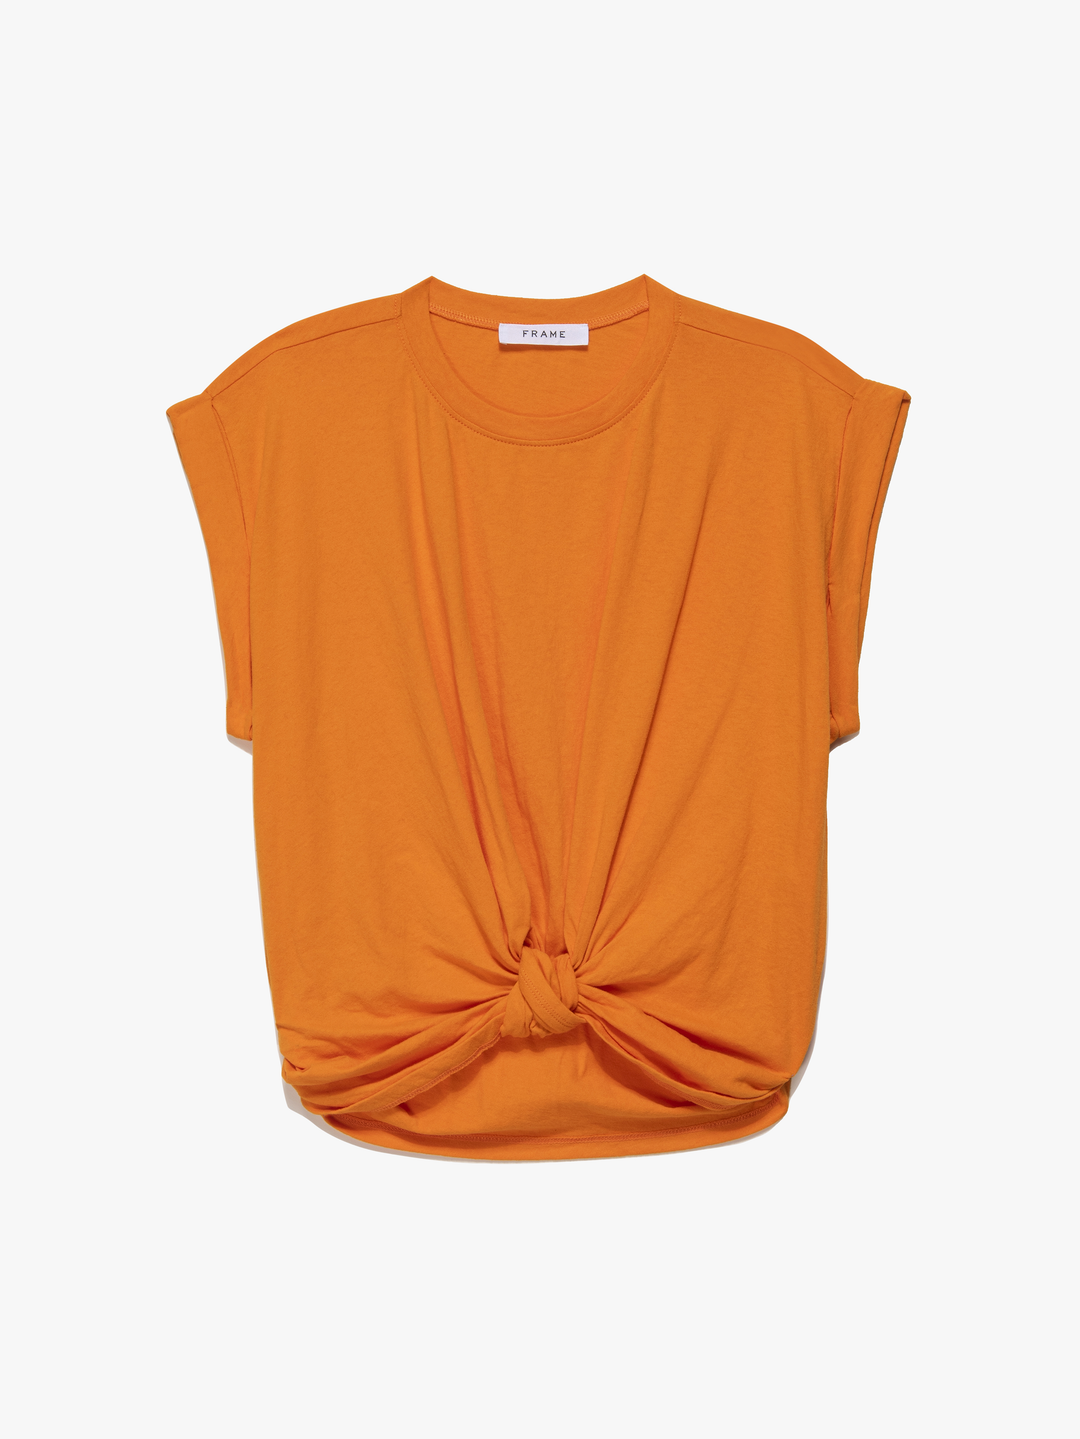 Frame - Knot Rolled Tee in Nectarine